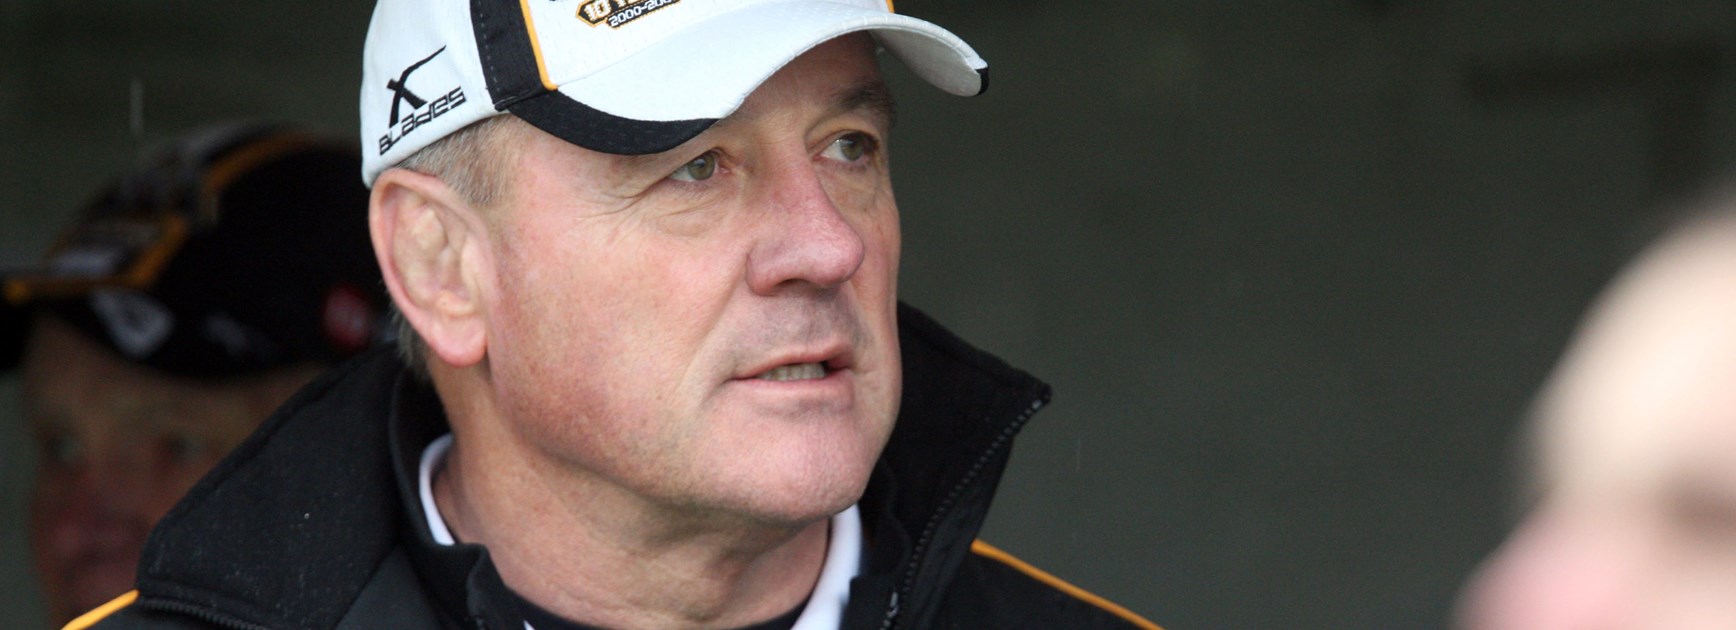 Tim Sheens returns to Wests Tigers in new role